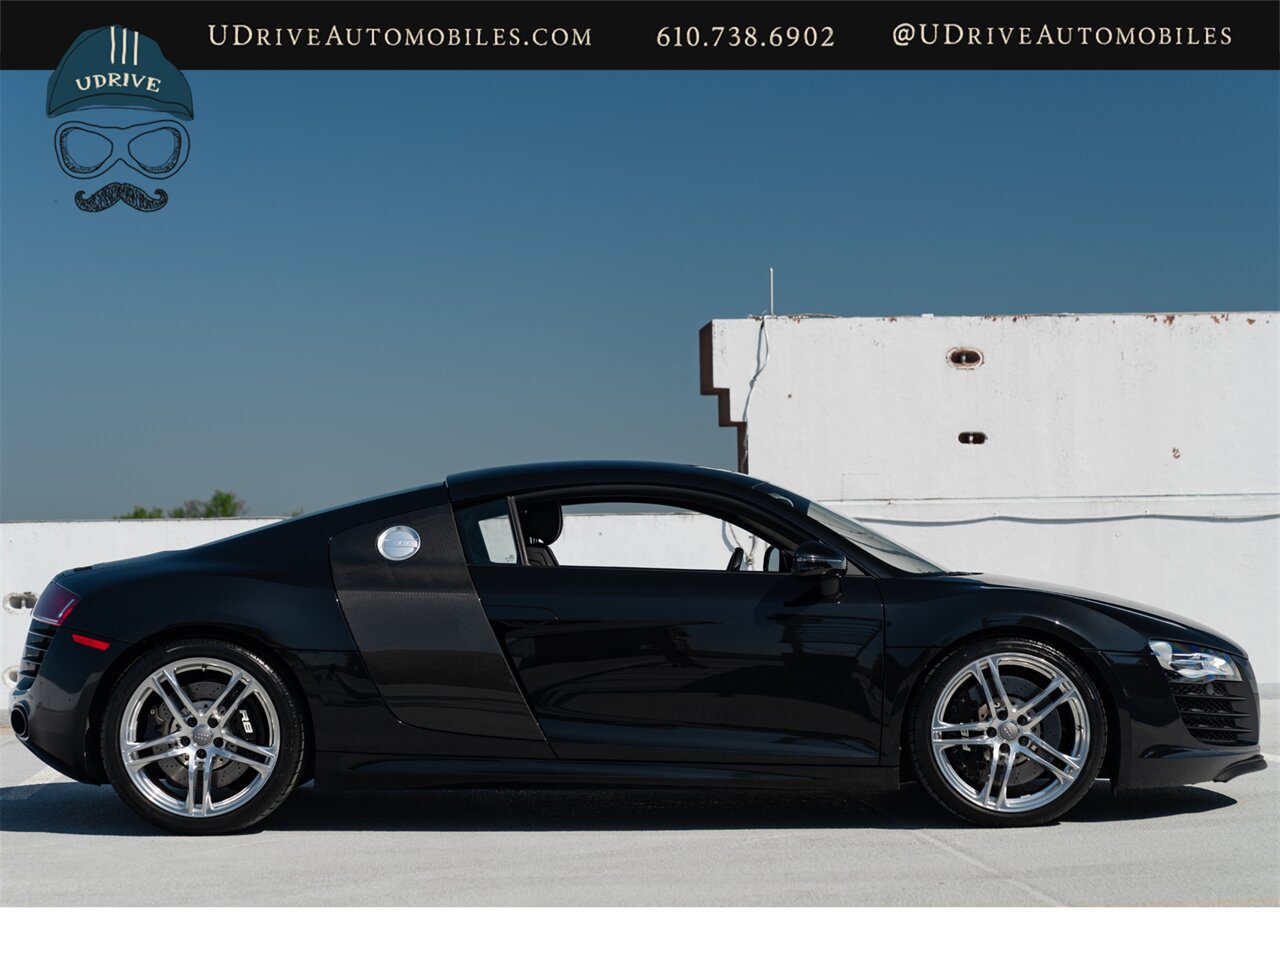 2009 Audi R8 Quattro  4.2L V8 6 Speed Manual - Photo 17 - West Chester, PA 19382